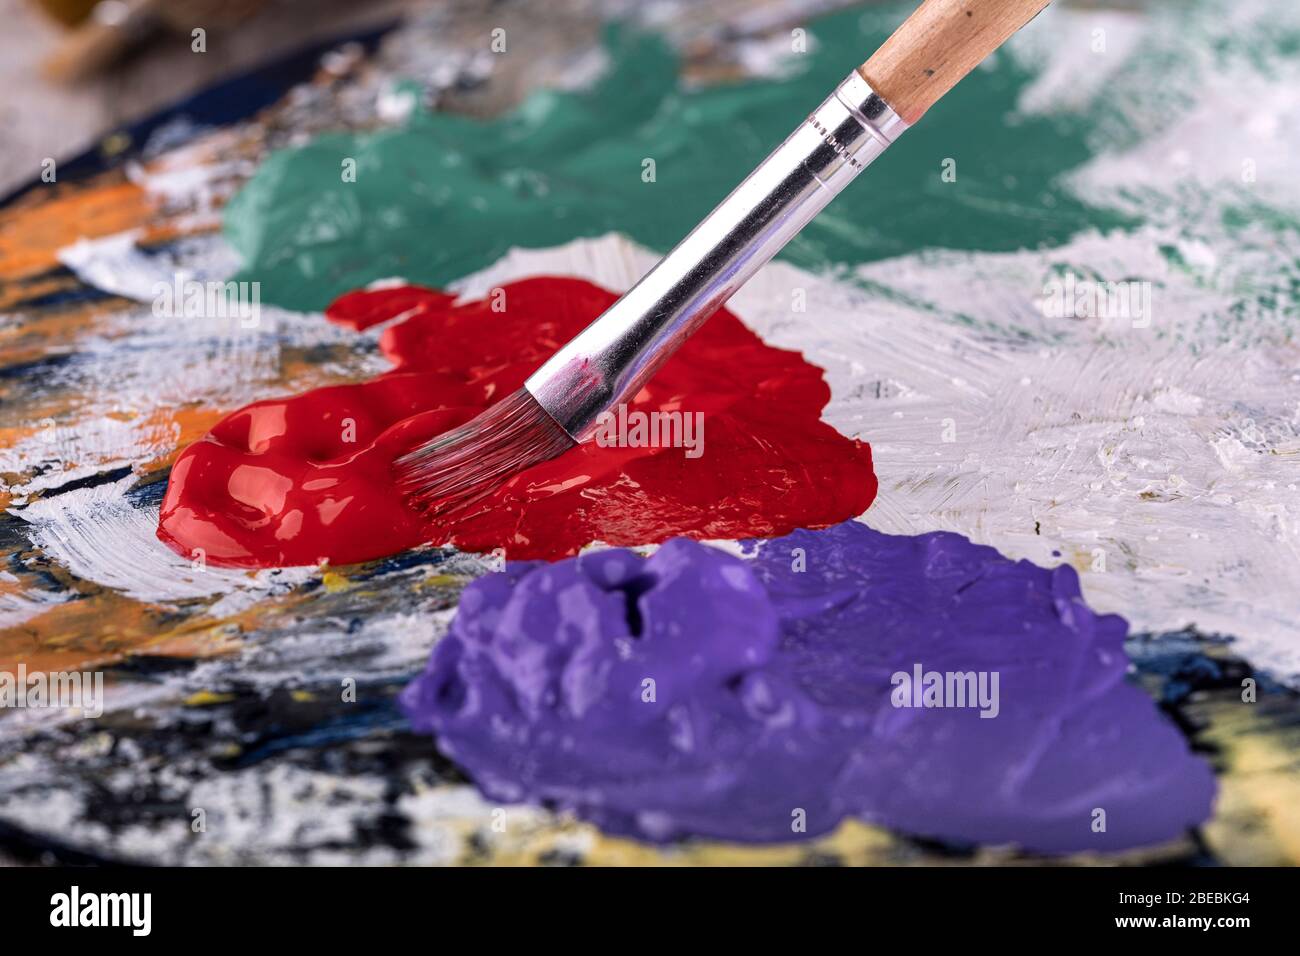 Fine art school. Closeup of artist hands holding wooden palette, mixing acrylic paint with brush. Stock Photo